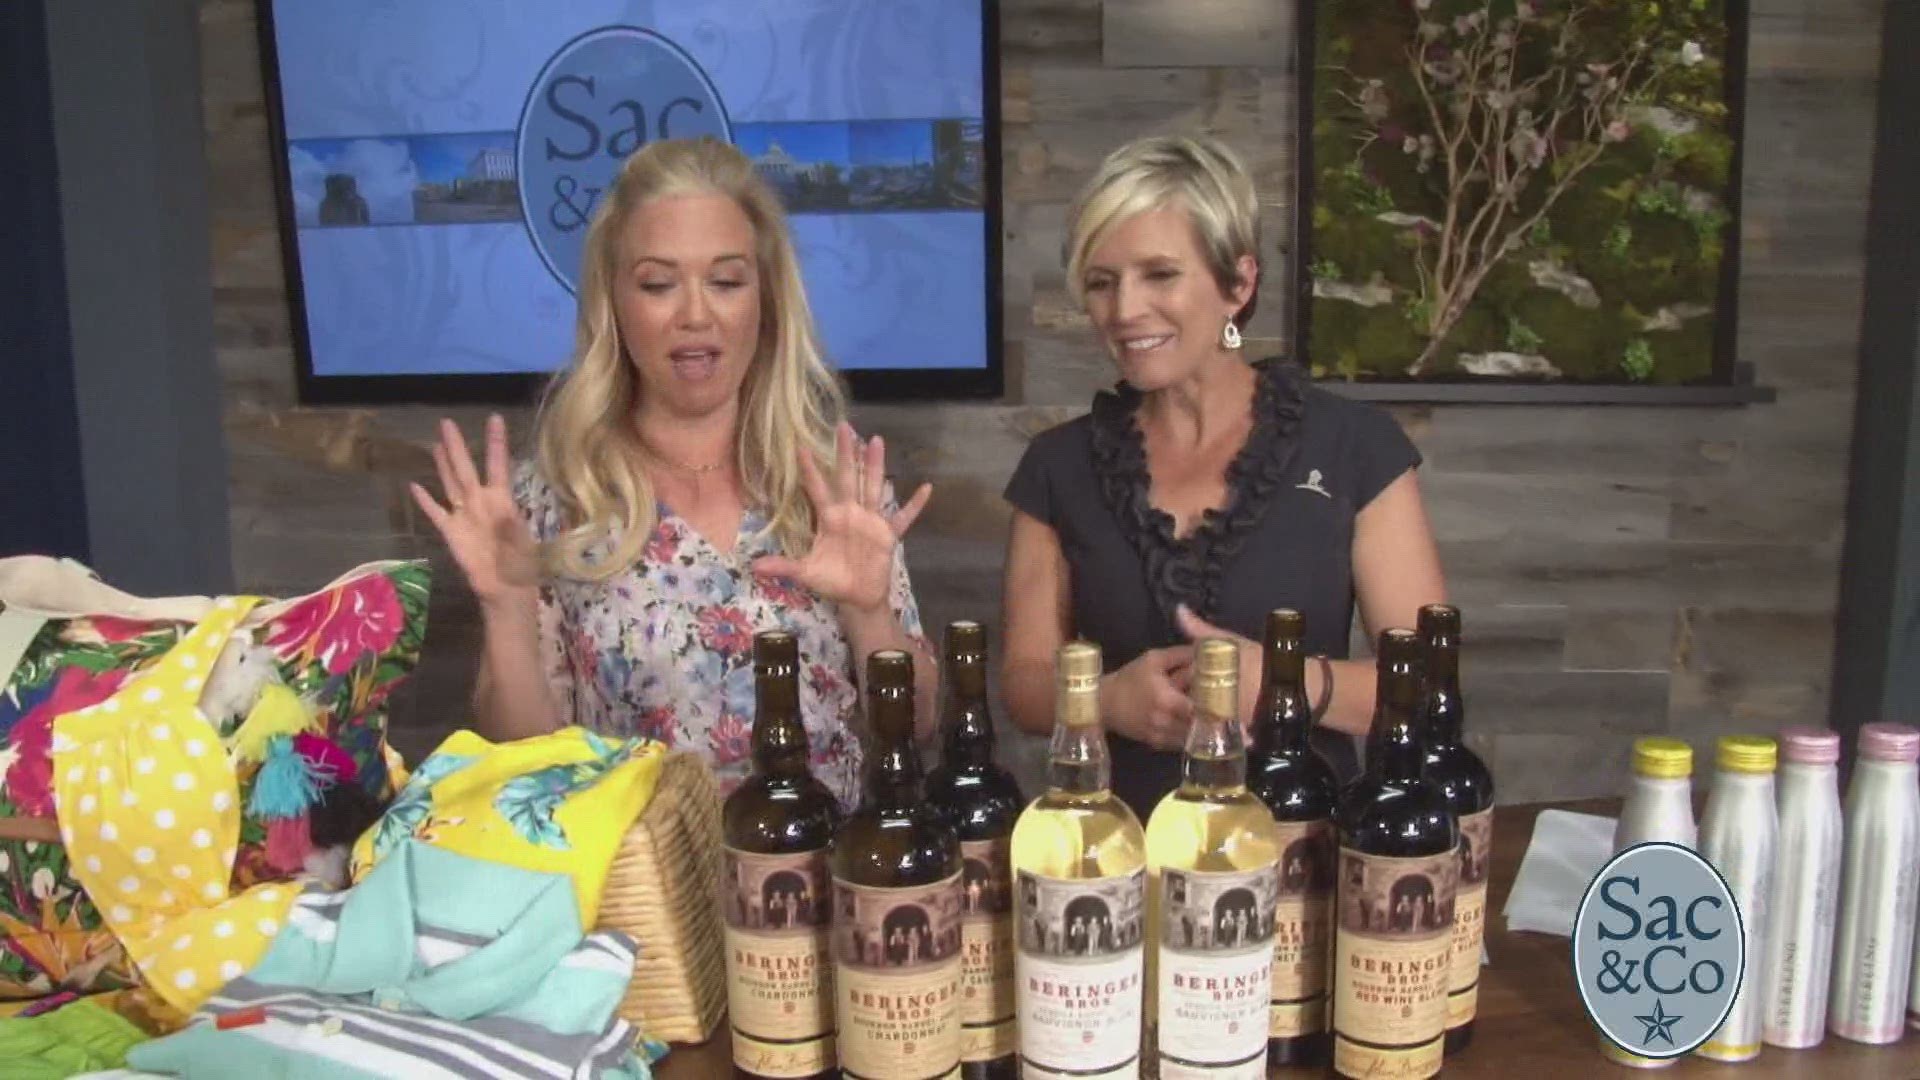 Melissa Crowley chats with Beauty and Lifestyle expert Keri Parker about this summer’s must-haves!  The following is a paid segment sponsored by JCPenny, Beringer Brothers, Sterling Vineyards, Jose Cuervo, and Amber.